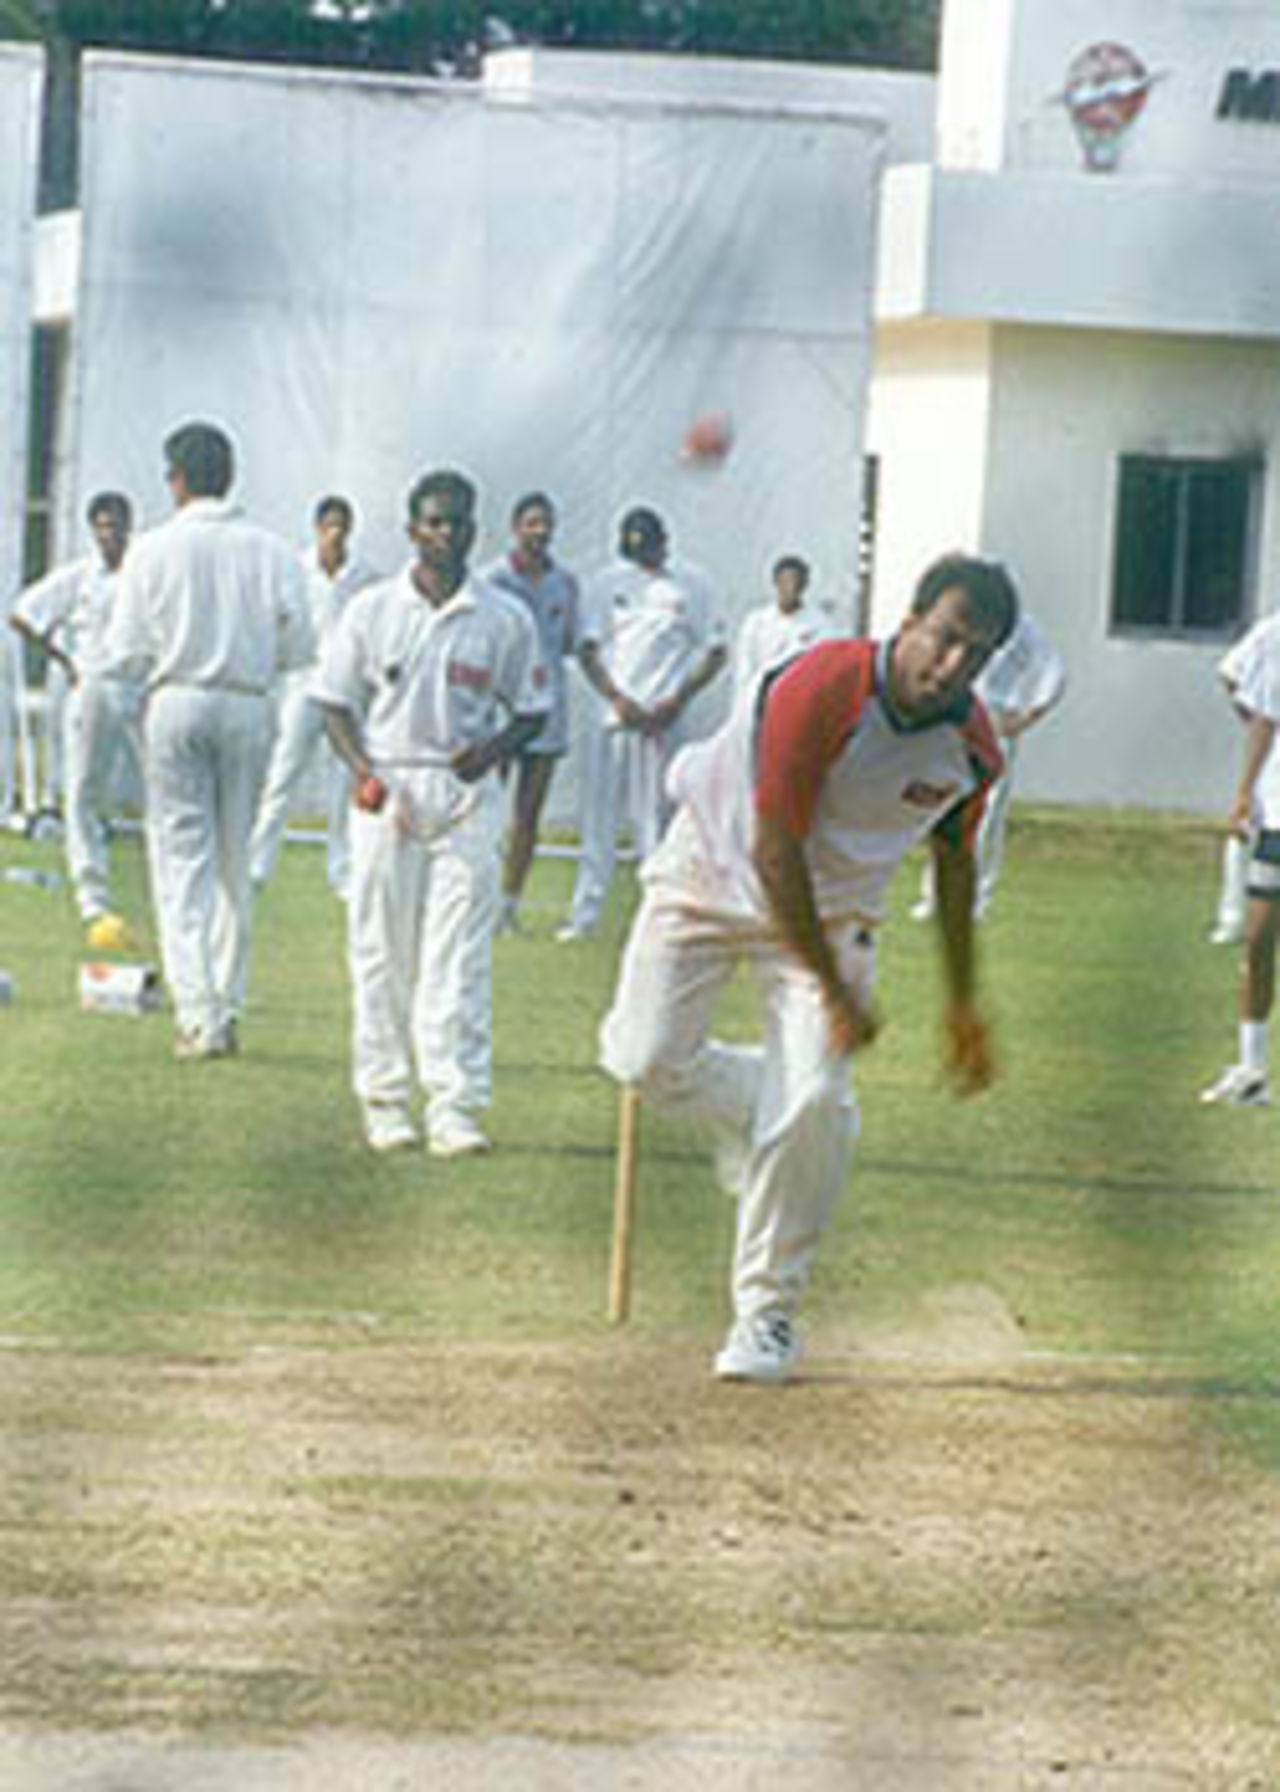 Robin Singh bowling at the nets on the opening day of the camp, MRF Pace Foundation, Chennai, 14 Sep 2000.